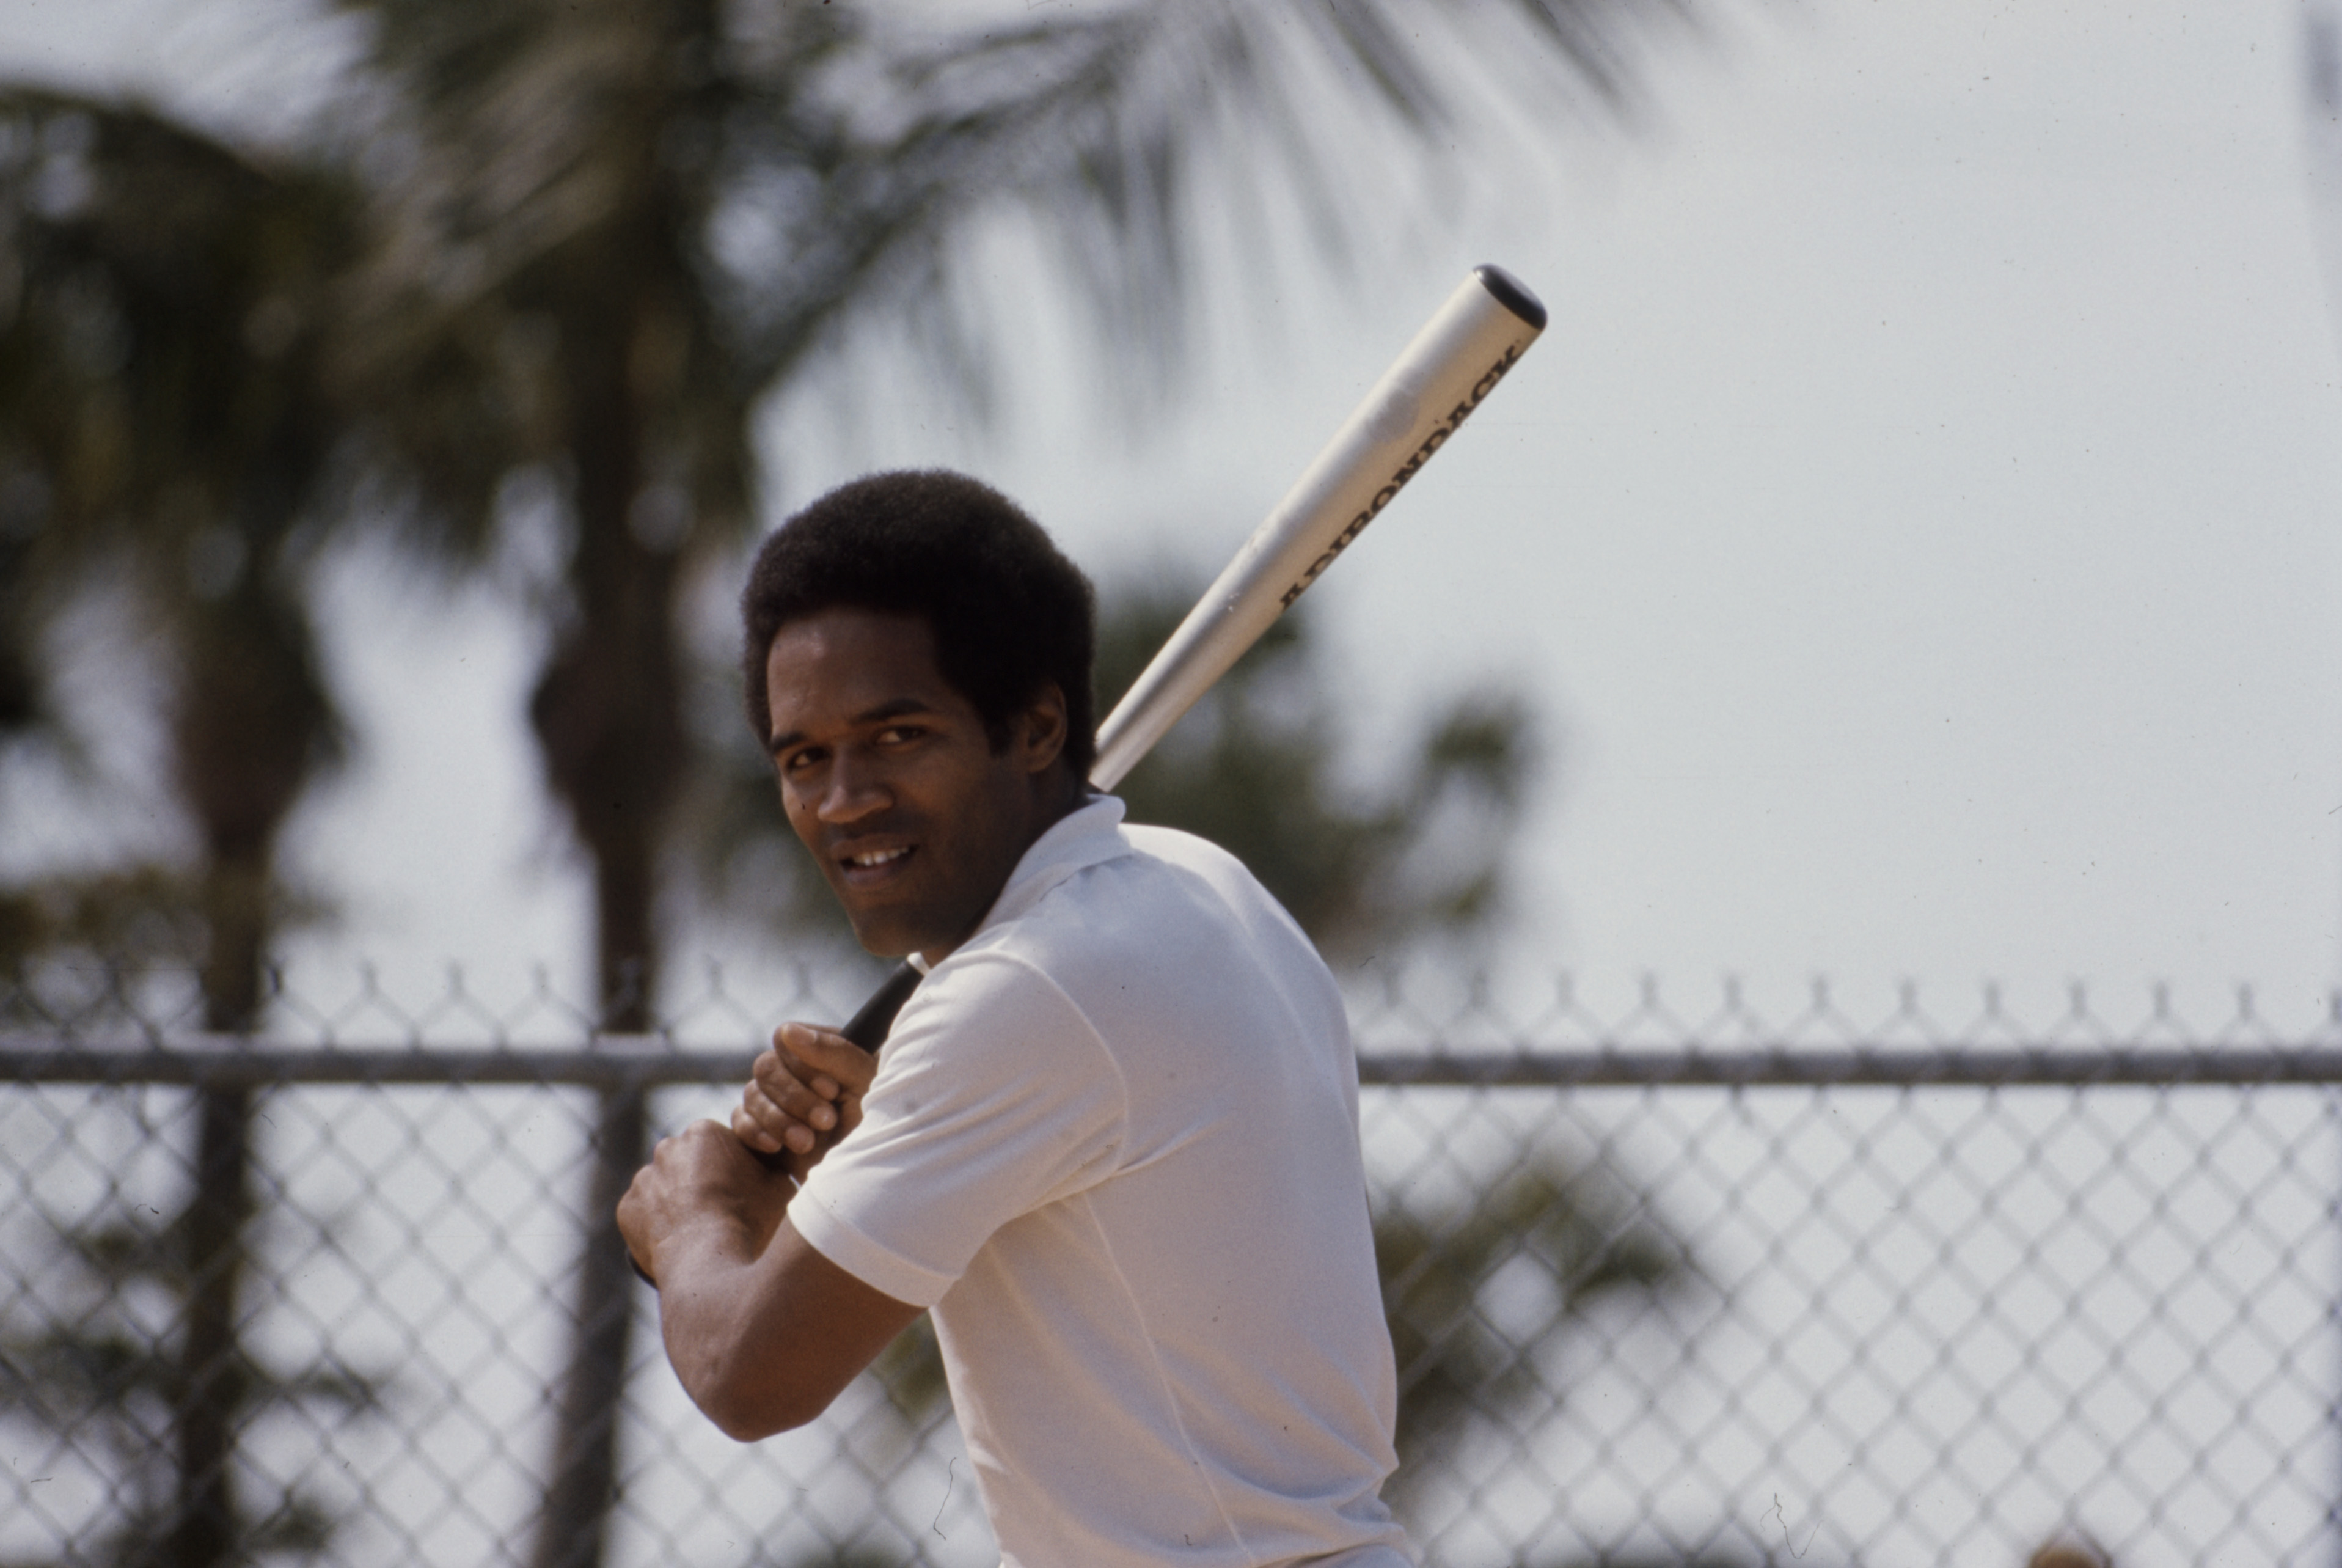 O.J. Simpson Was Inspired to Play Sports After Meeting Willie Mays